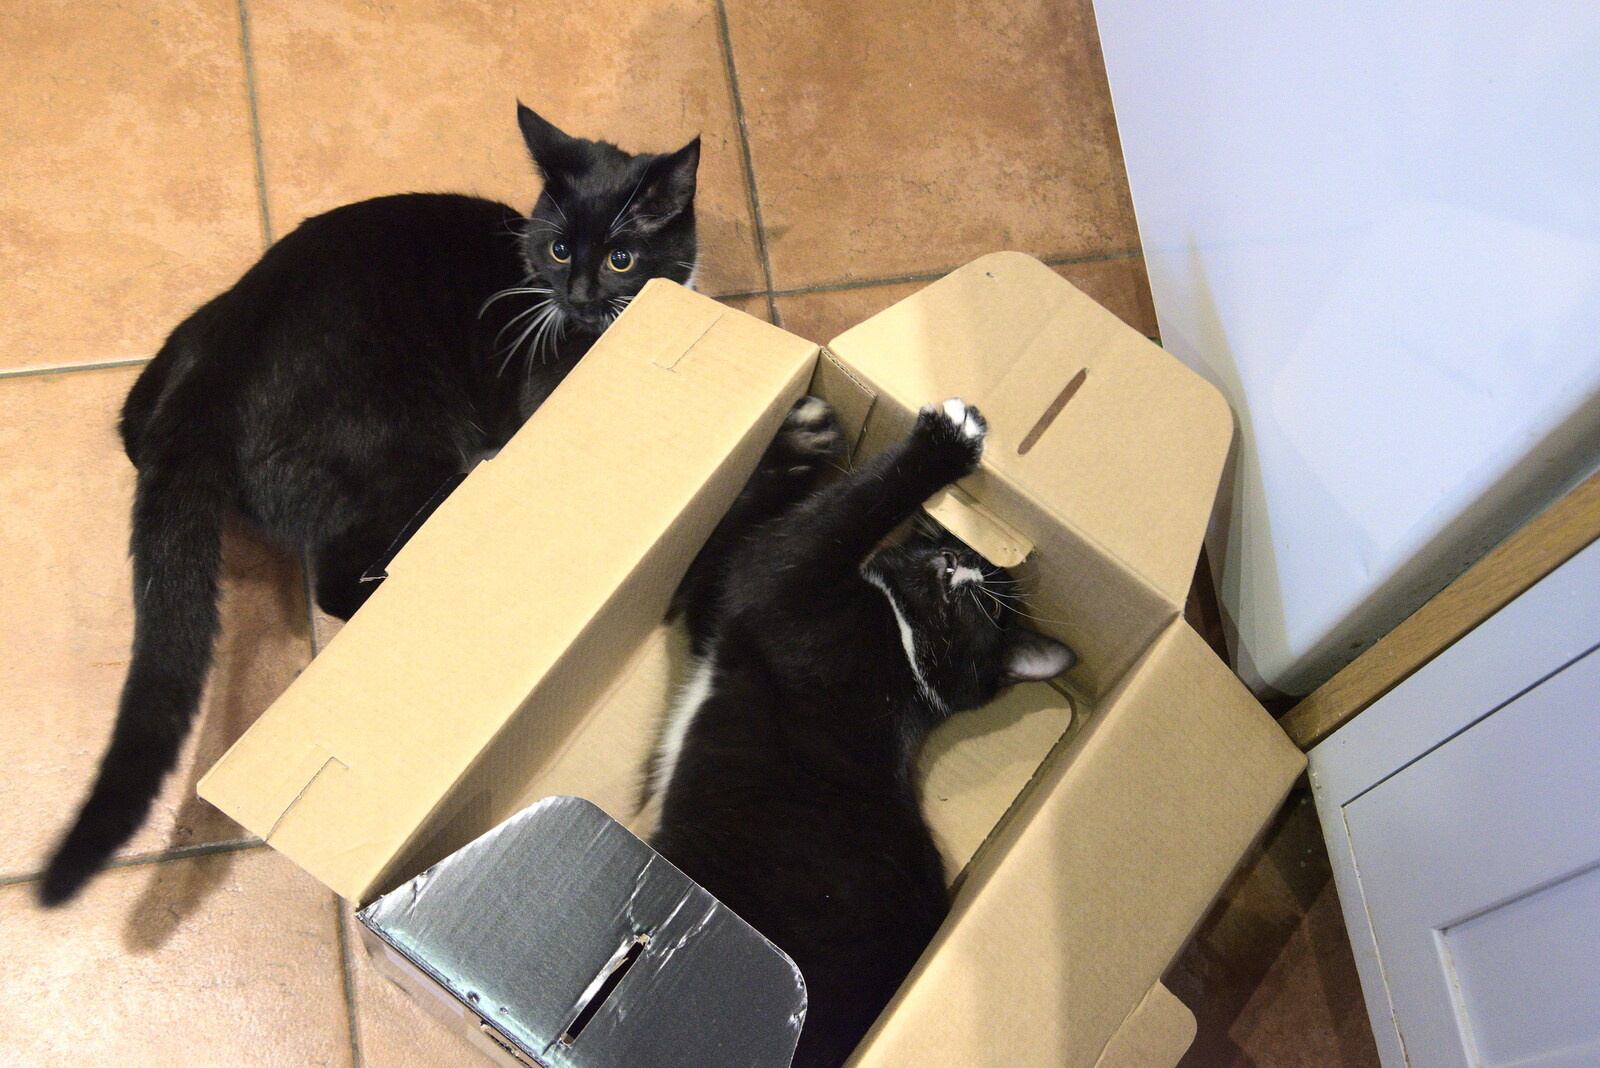 The kittens play around in a cardboard box from Christmas Day at Home, Brome, Suffolk - 25th December 2021